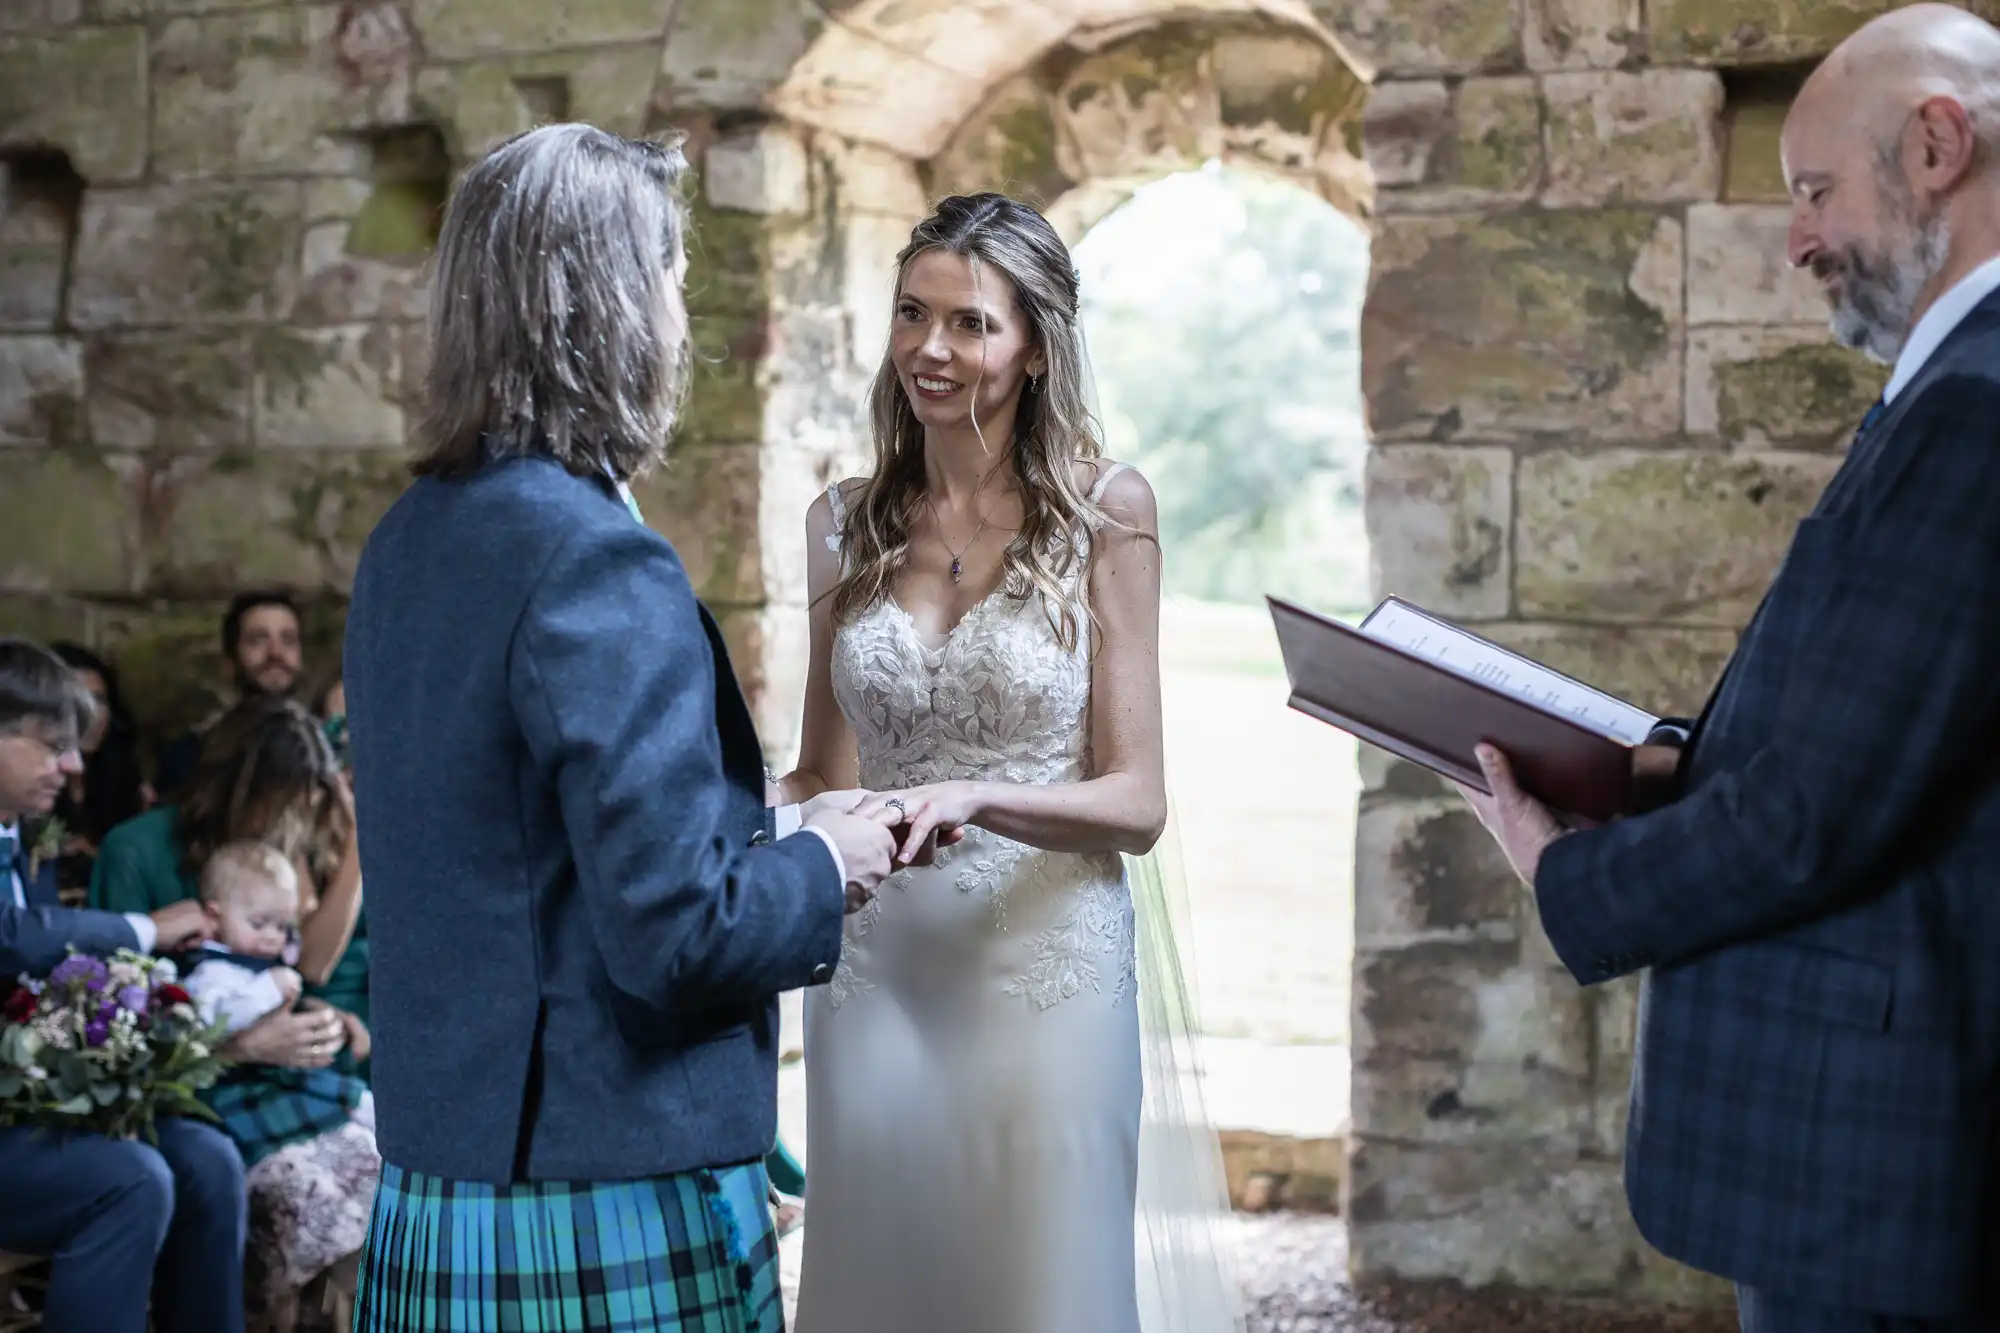 A couple stands in front of each other exchanging rings in a rustic stone building, while an officiant reads from a book. The bride wears a white gown and the groom wears a blue jacket with a kilt.